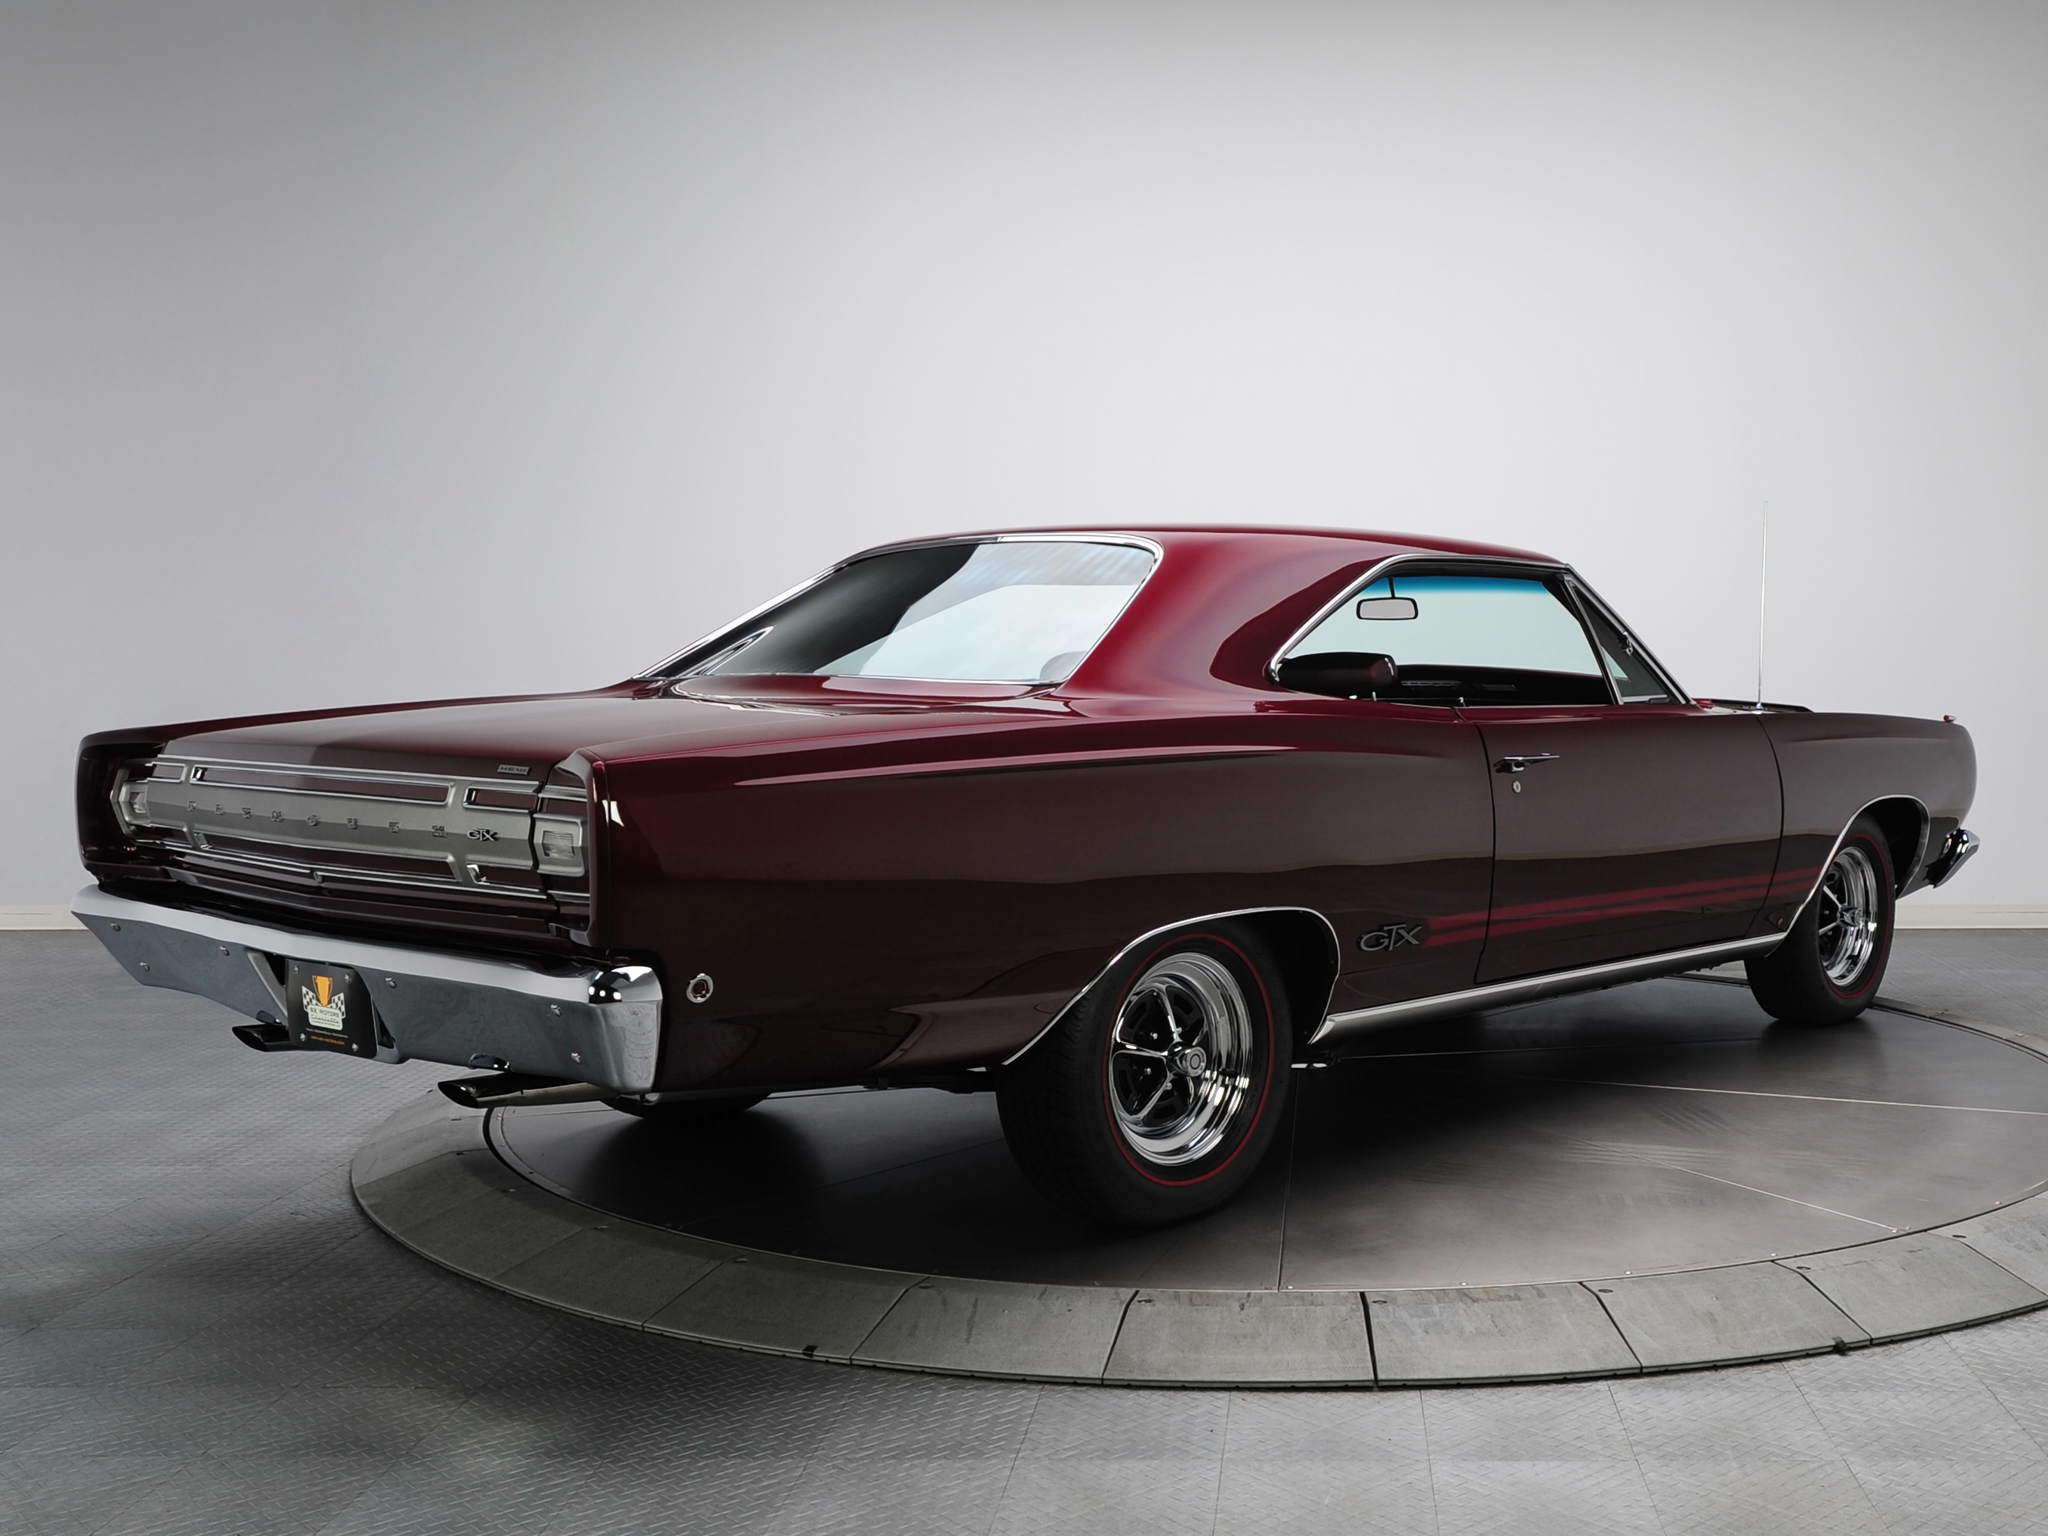 Download 2048x1536 Plymouth Gtx Back View, Classic, Cars